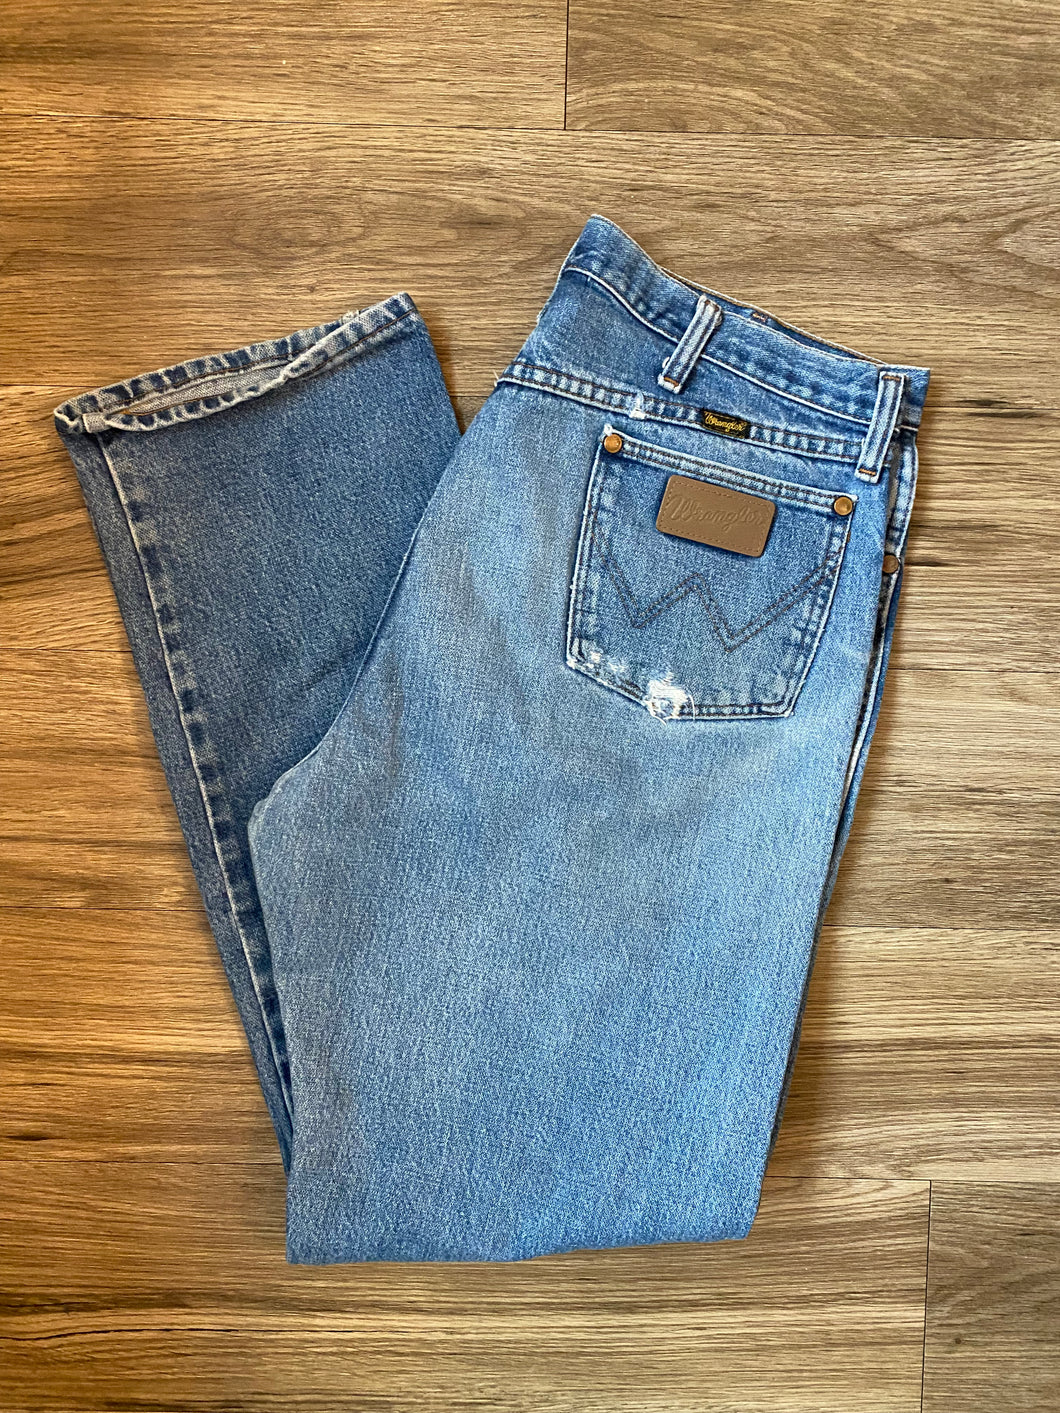 Distressed Wrangler Jeans 34 inch